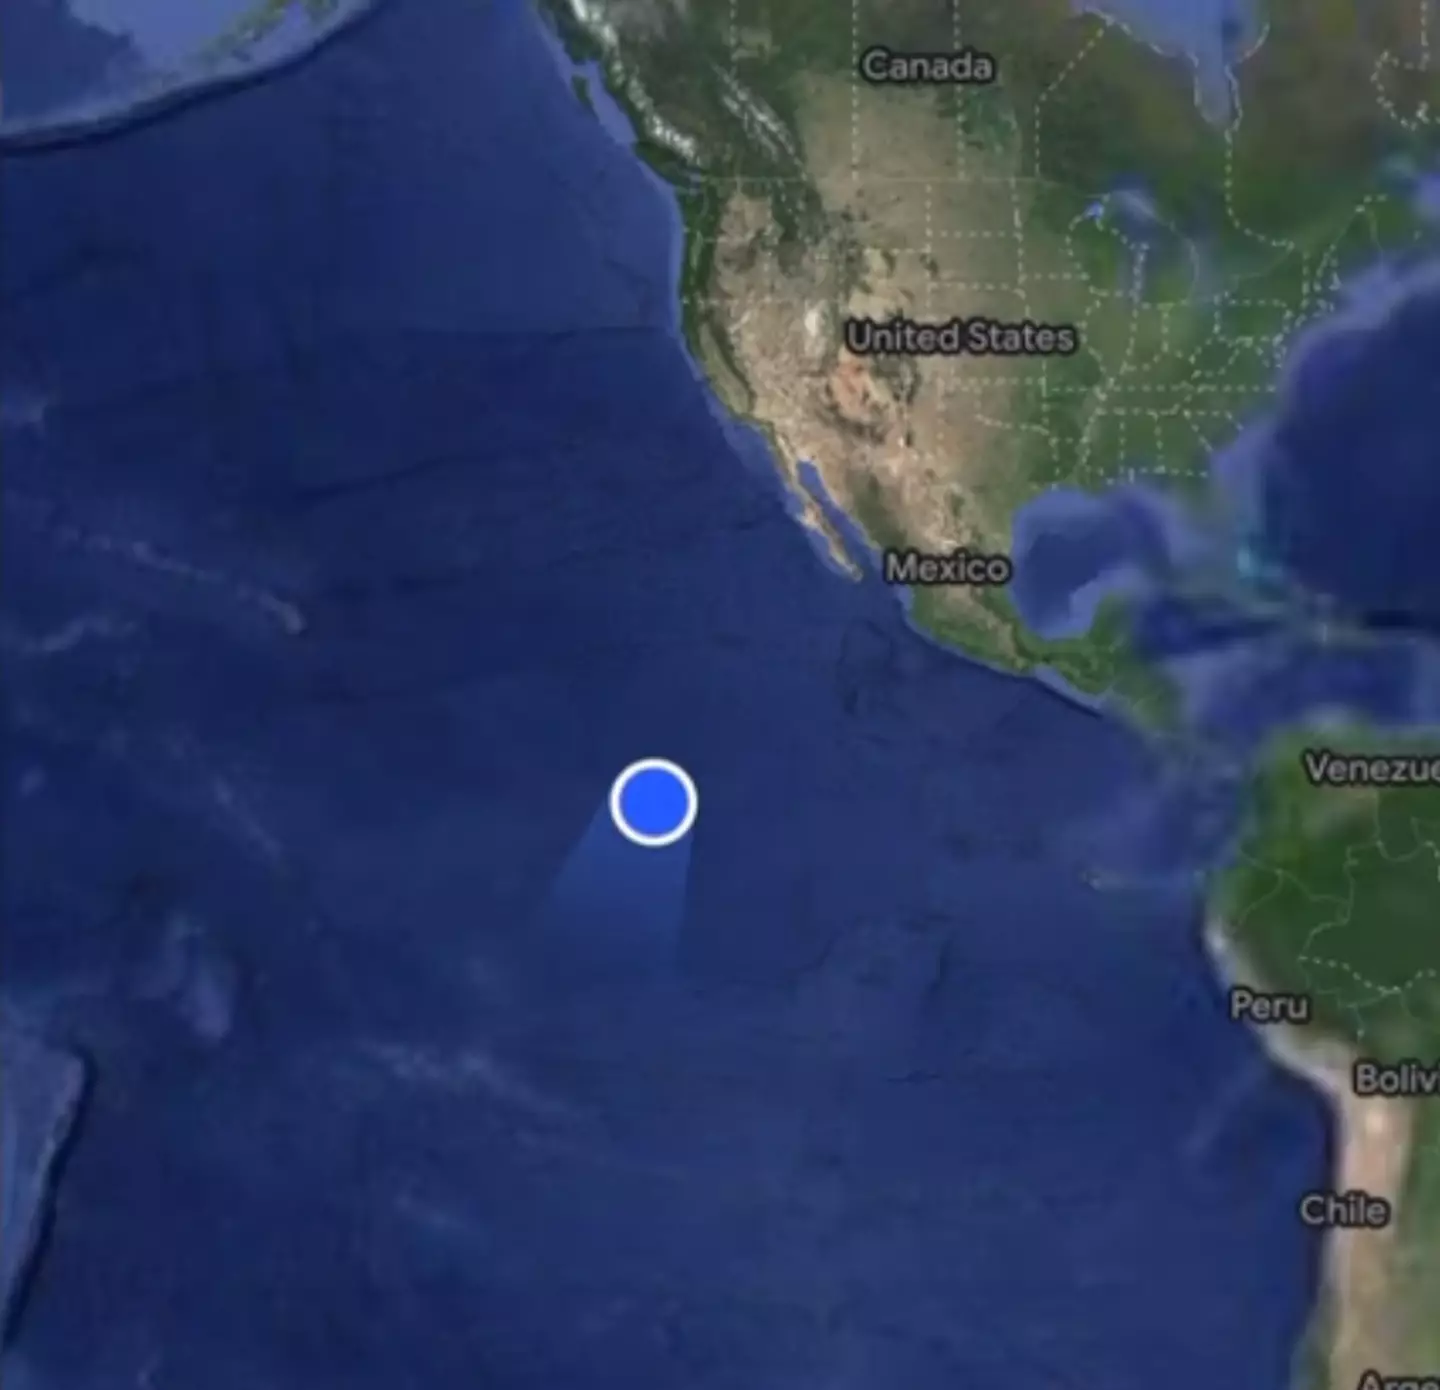 Recently Luke revealed that he is in the middle of the Pacific Ocean (TikTok/@sailing_songbird)